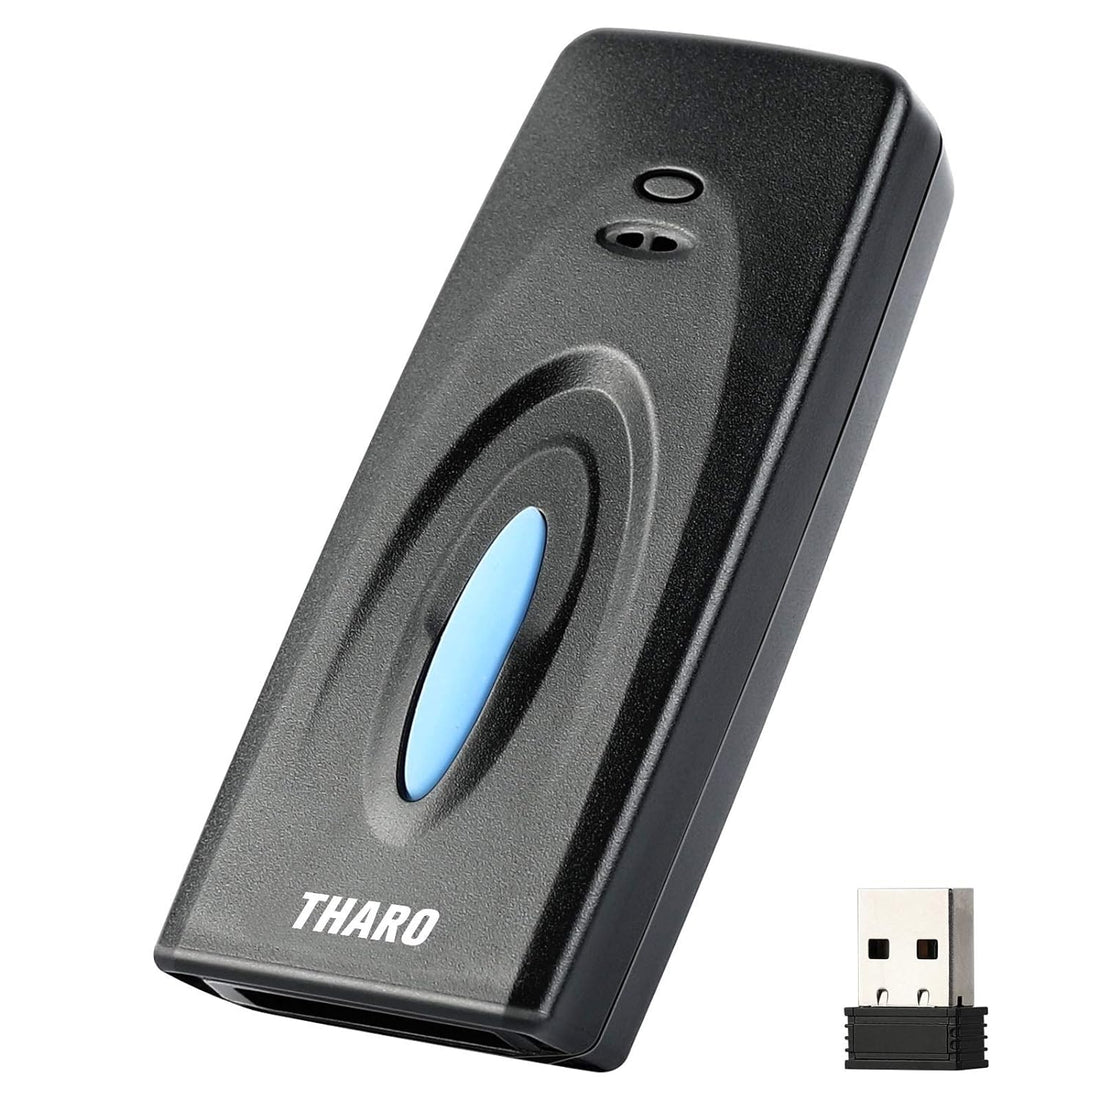 THARO M5 1D Portable Mini 3 in 1 Bluetooth Scanner, Compatible with Bluetooth Function & 2.4GHz Wireless & Wired Connection Work with Windows, Mac,Android, iOS Phones, Tablets or Computers (Black)